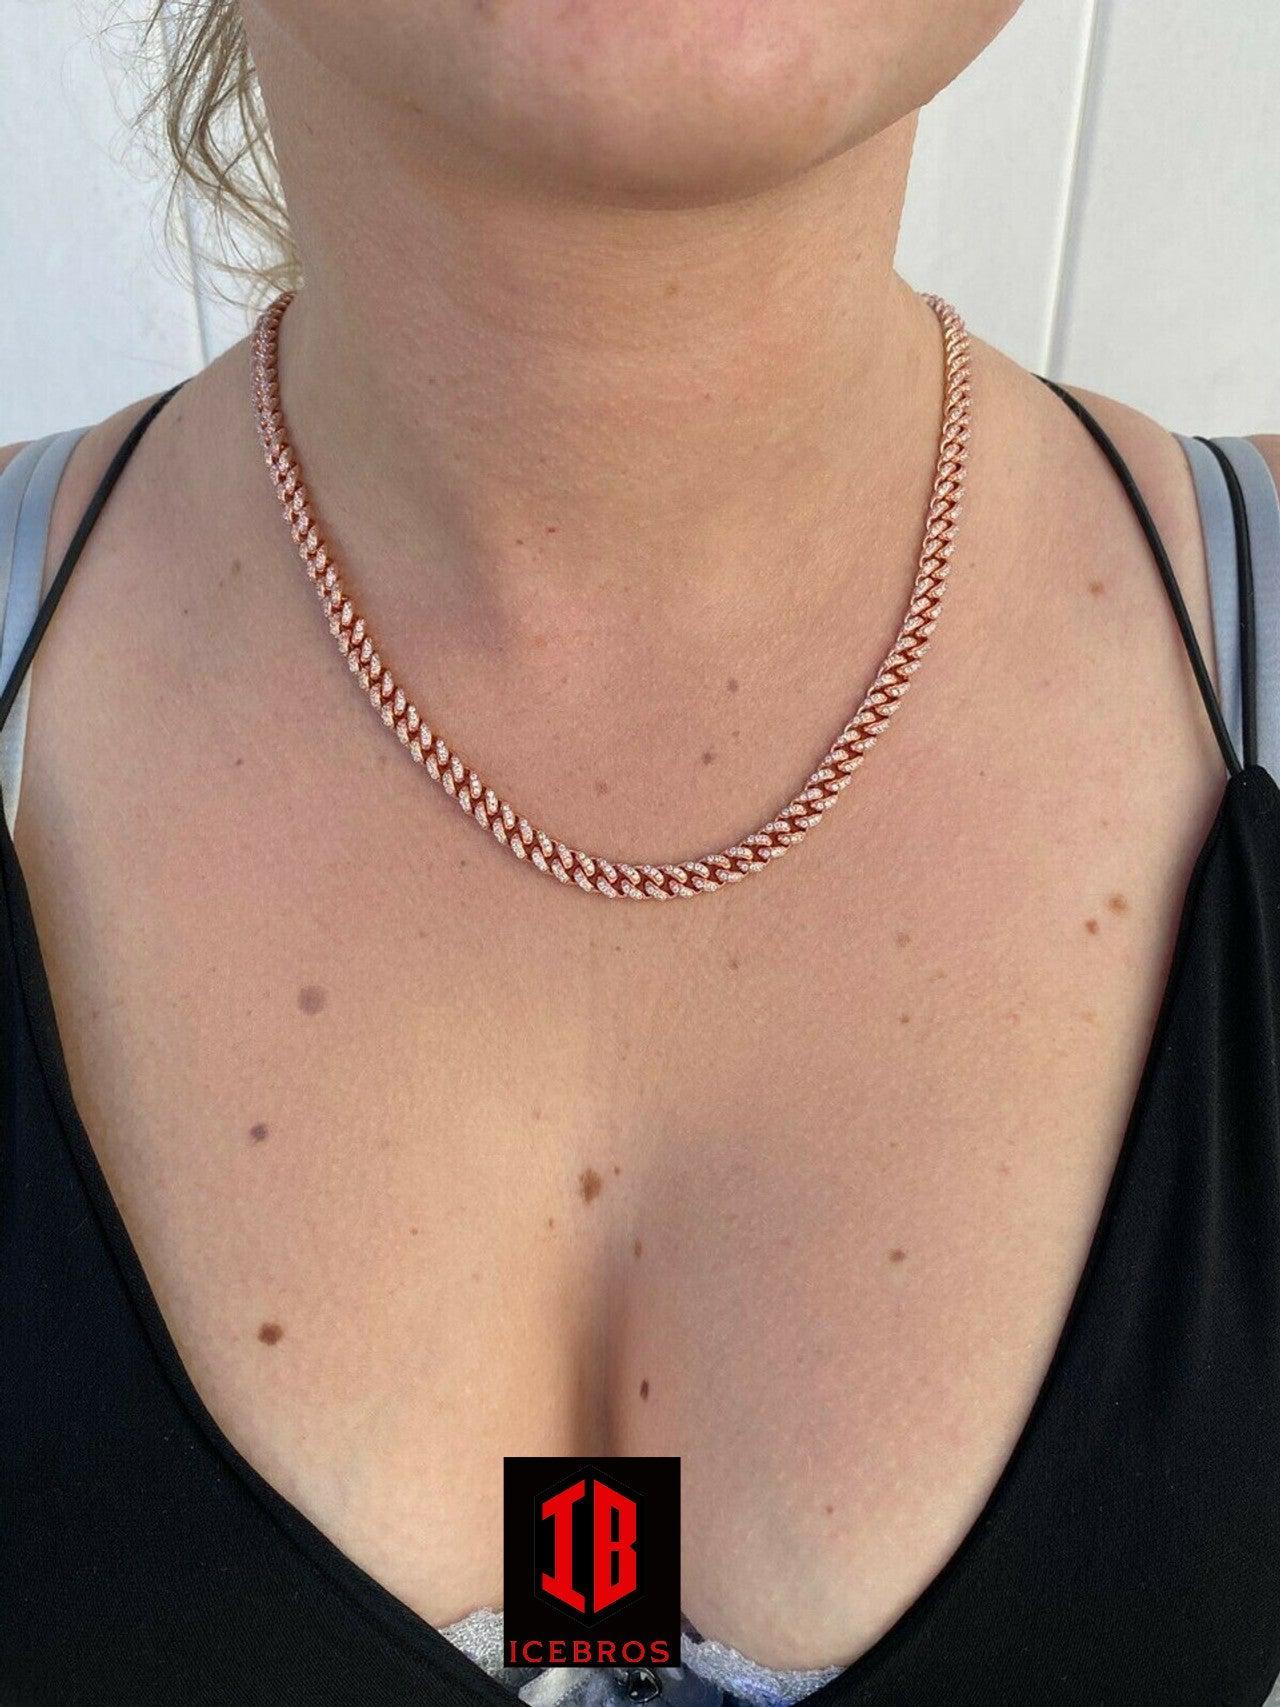 ROSE GOLD 6mm Miami Cuban Iced 14k Gold Solid 925 Silver Chain Necklace 16-30" Men Ladies